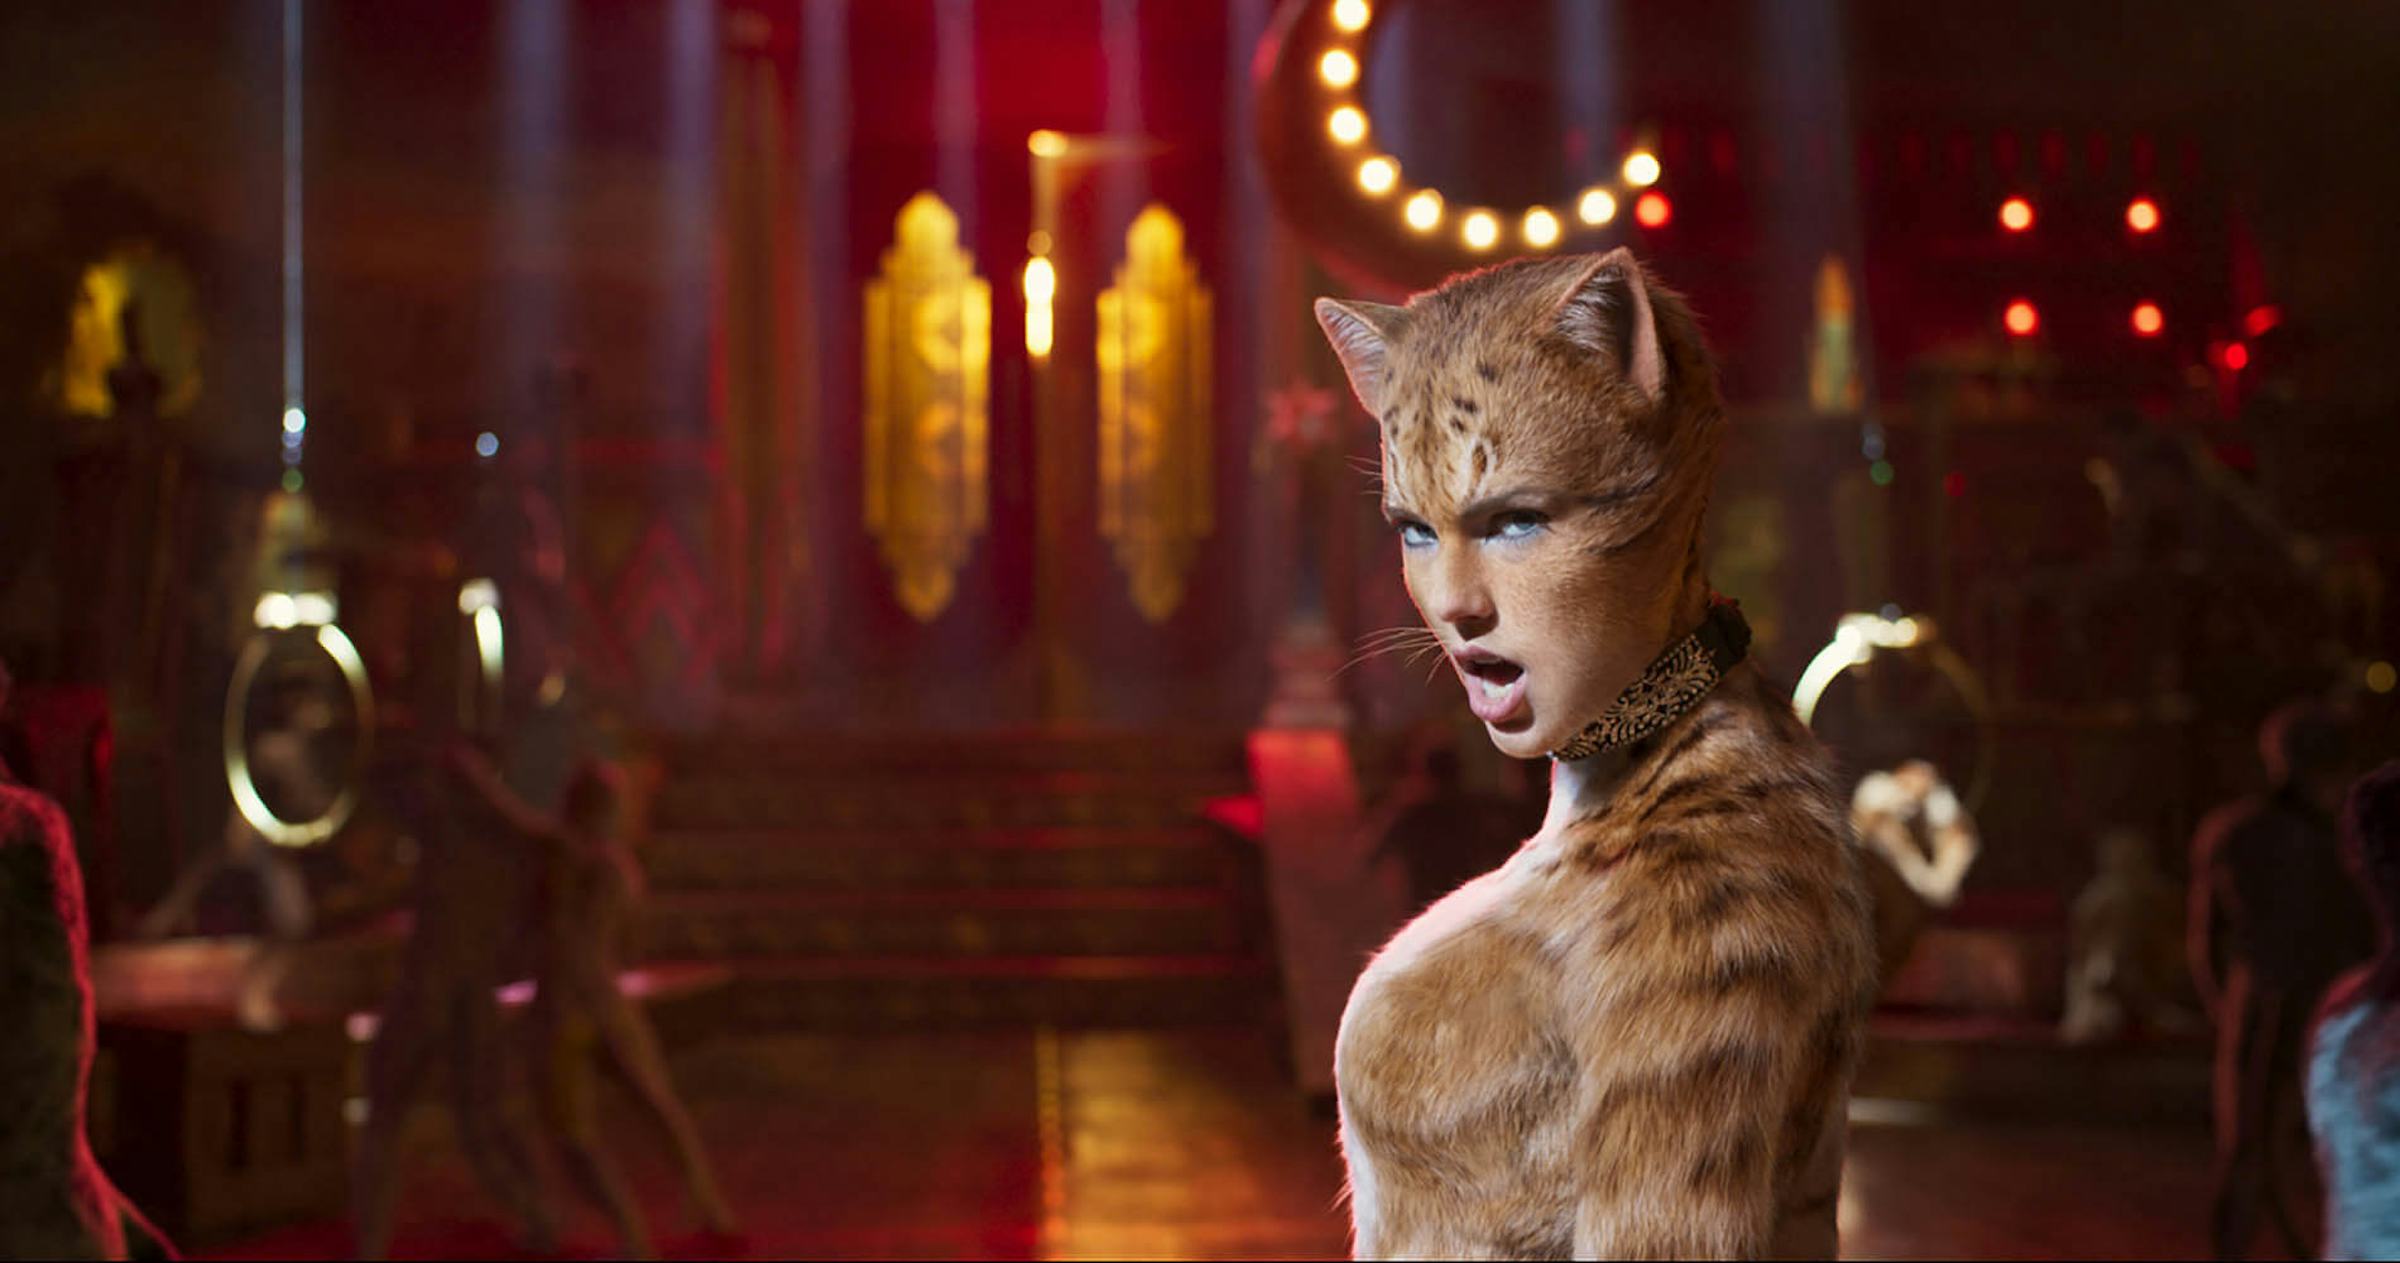 The Strangely Sexy New 'Cats' Trailer Is Here